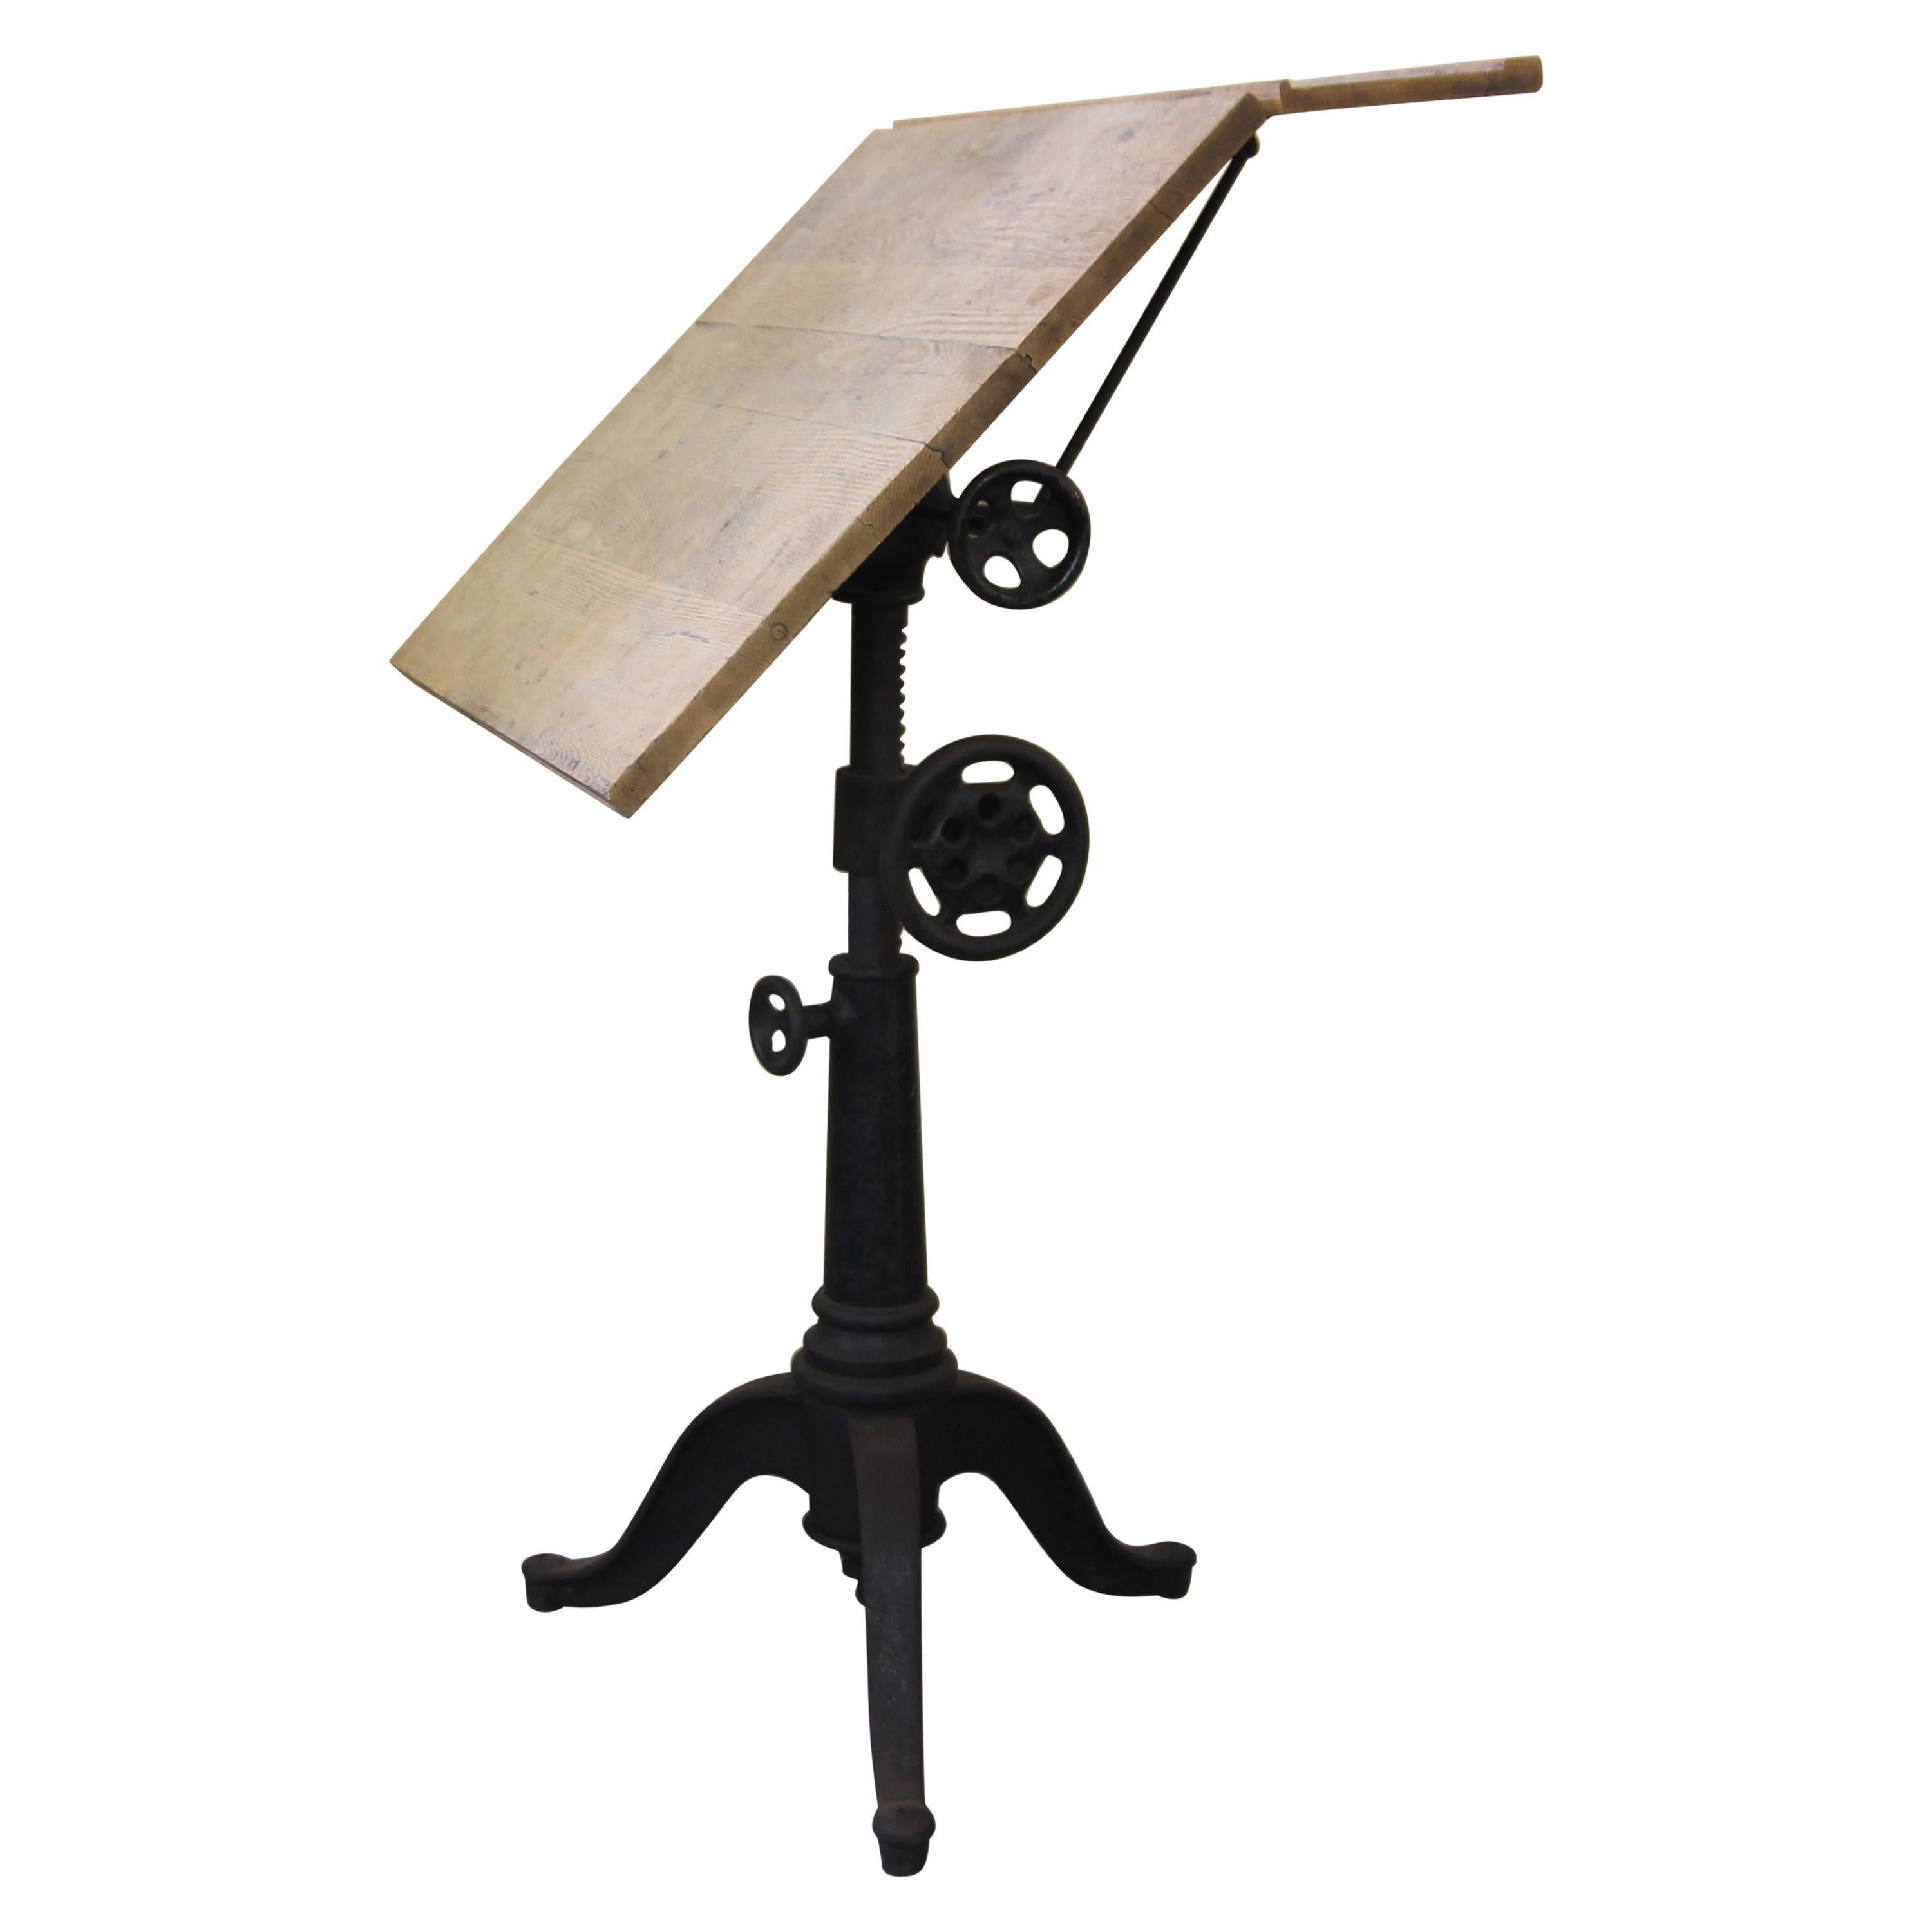 Small Turn of the Century Drafting Table